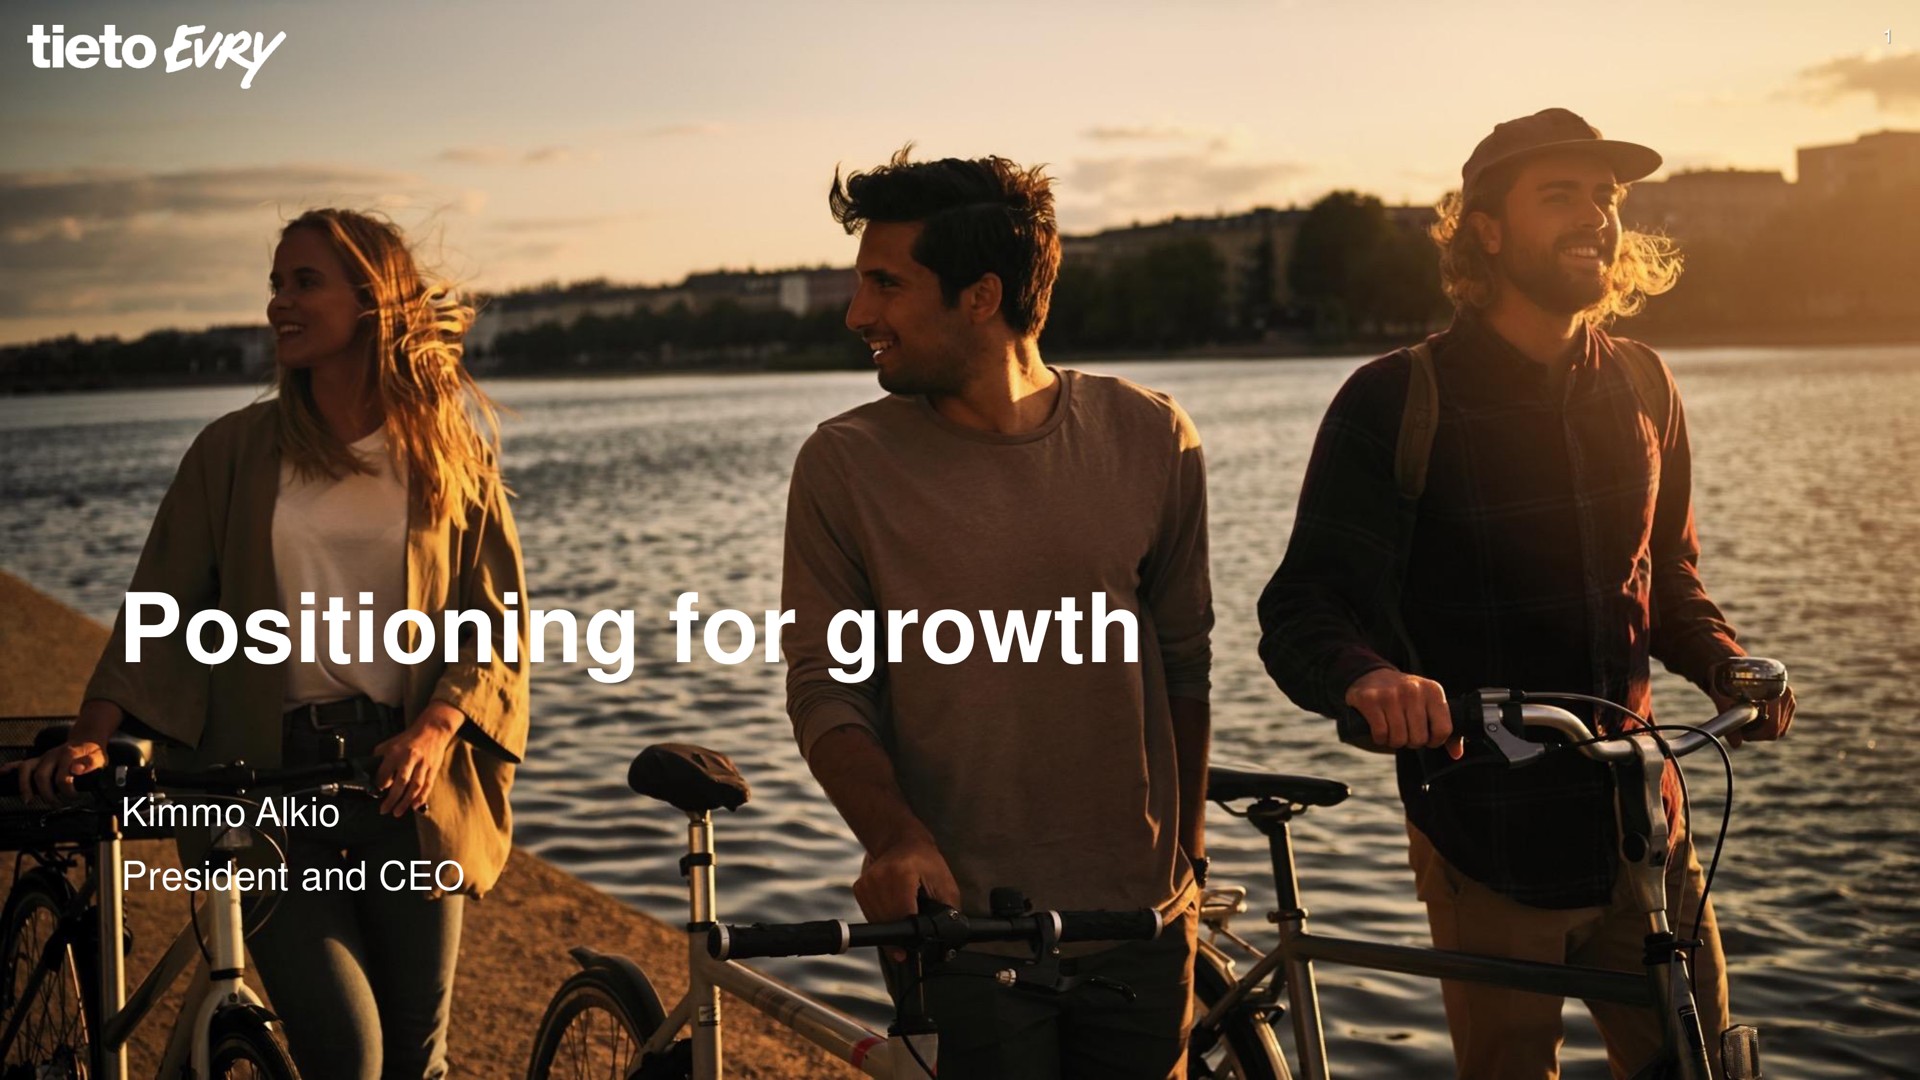 positioning for growth | Tietoevry